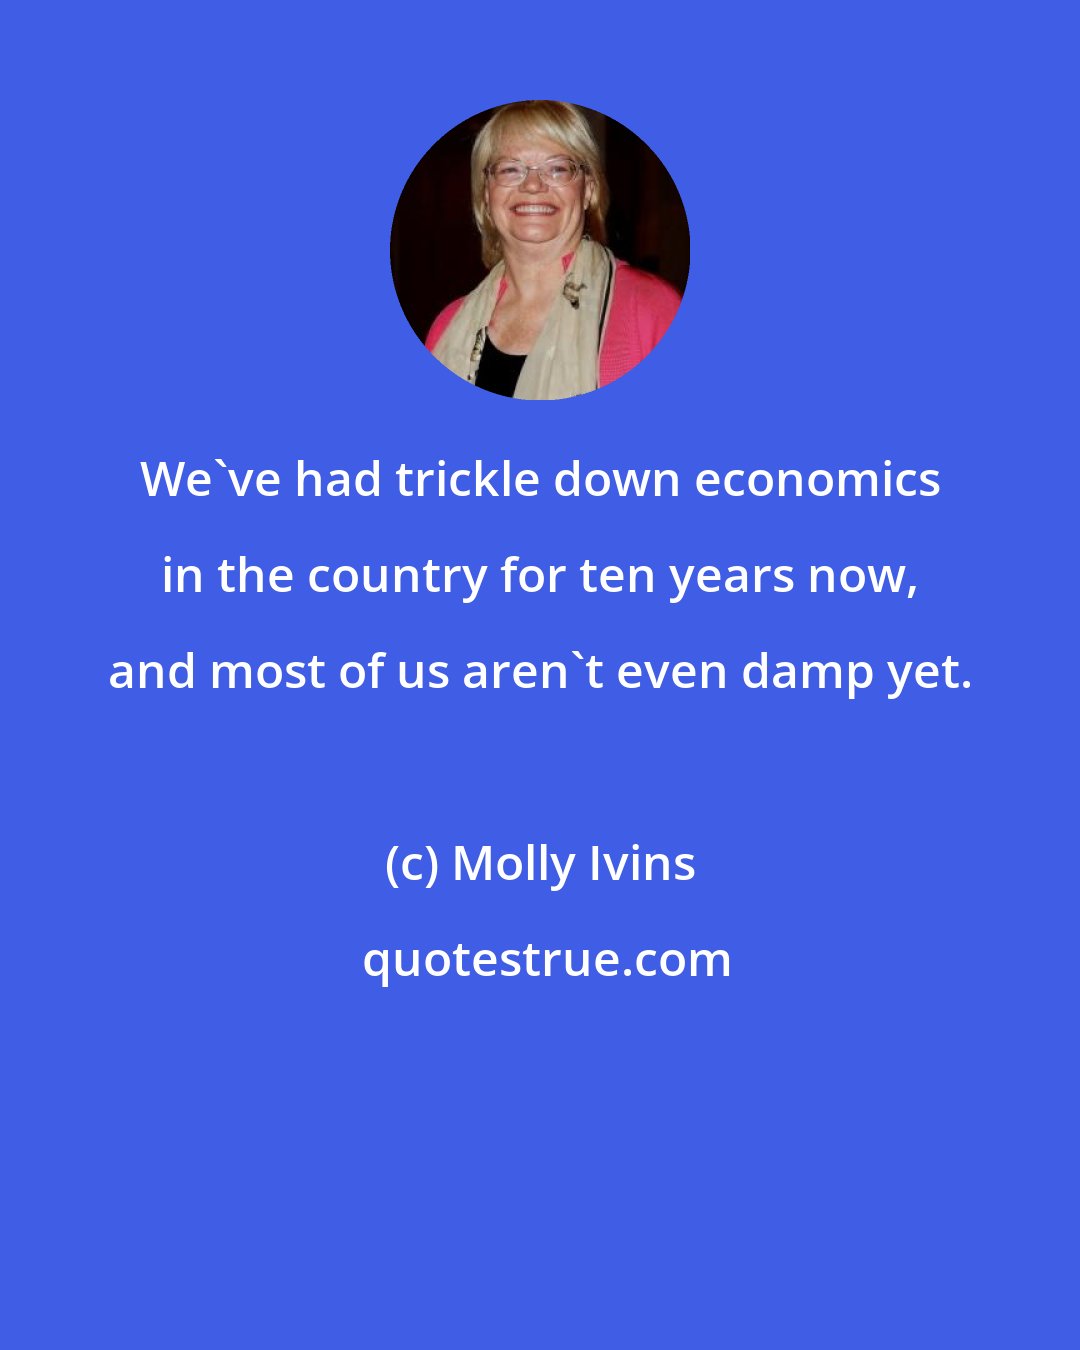 Molly Ivins: We've had trickle down economics in the country for ten years now, and most of us aren't even damp yet.